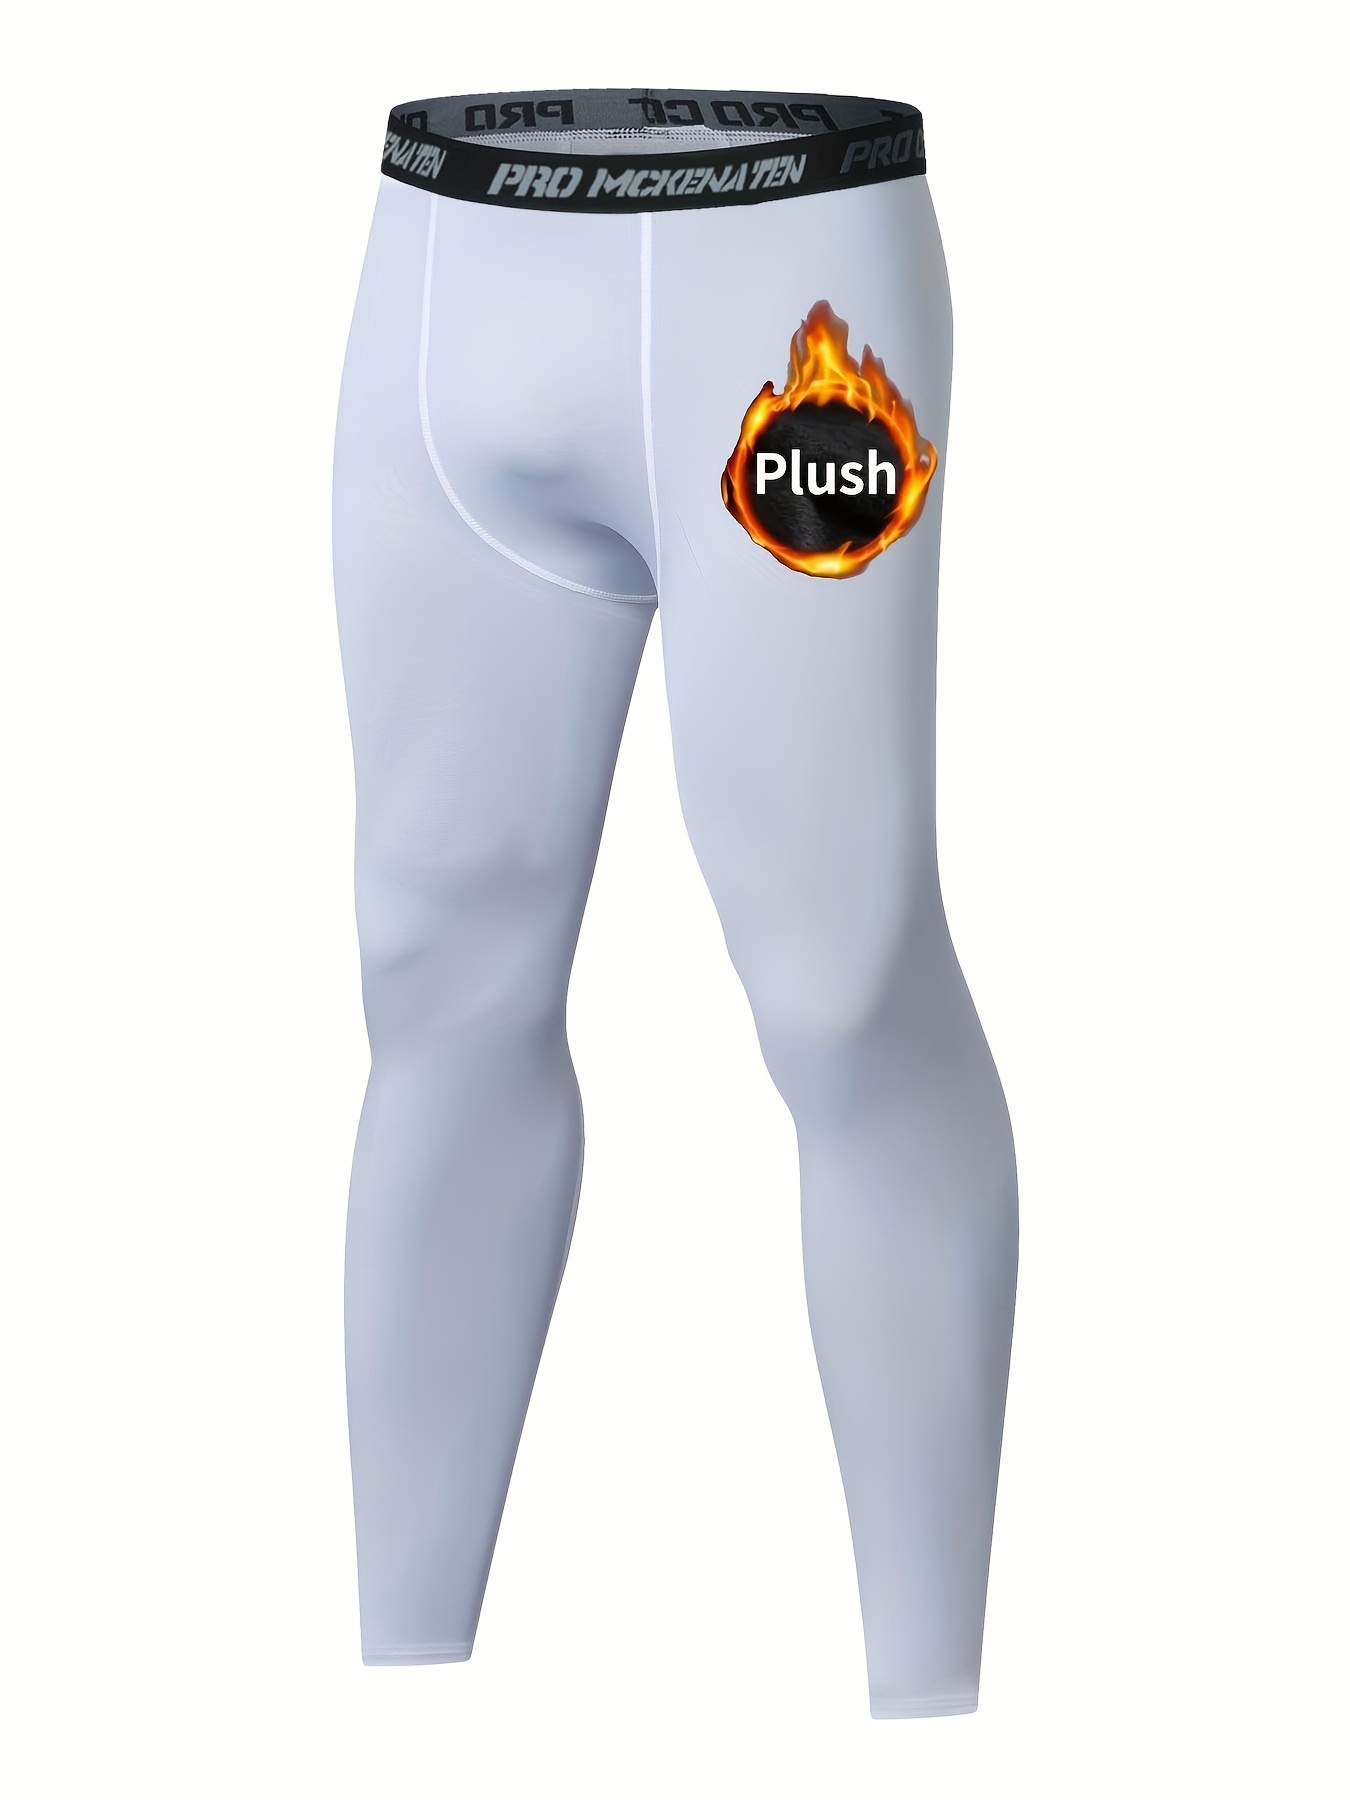 White Compression Pants Thermal Underwear for Women Thermal